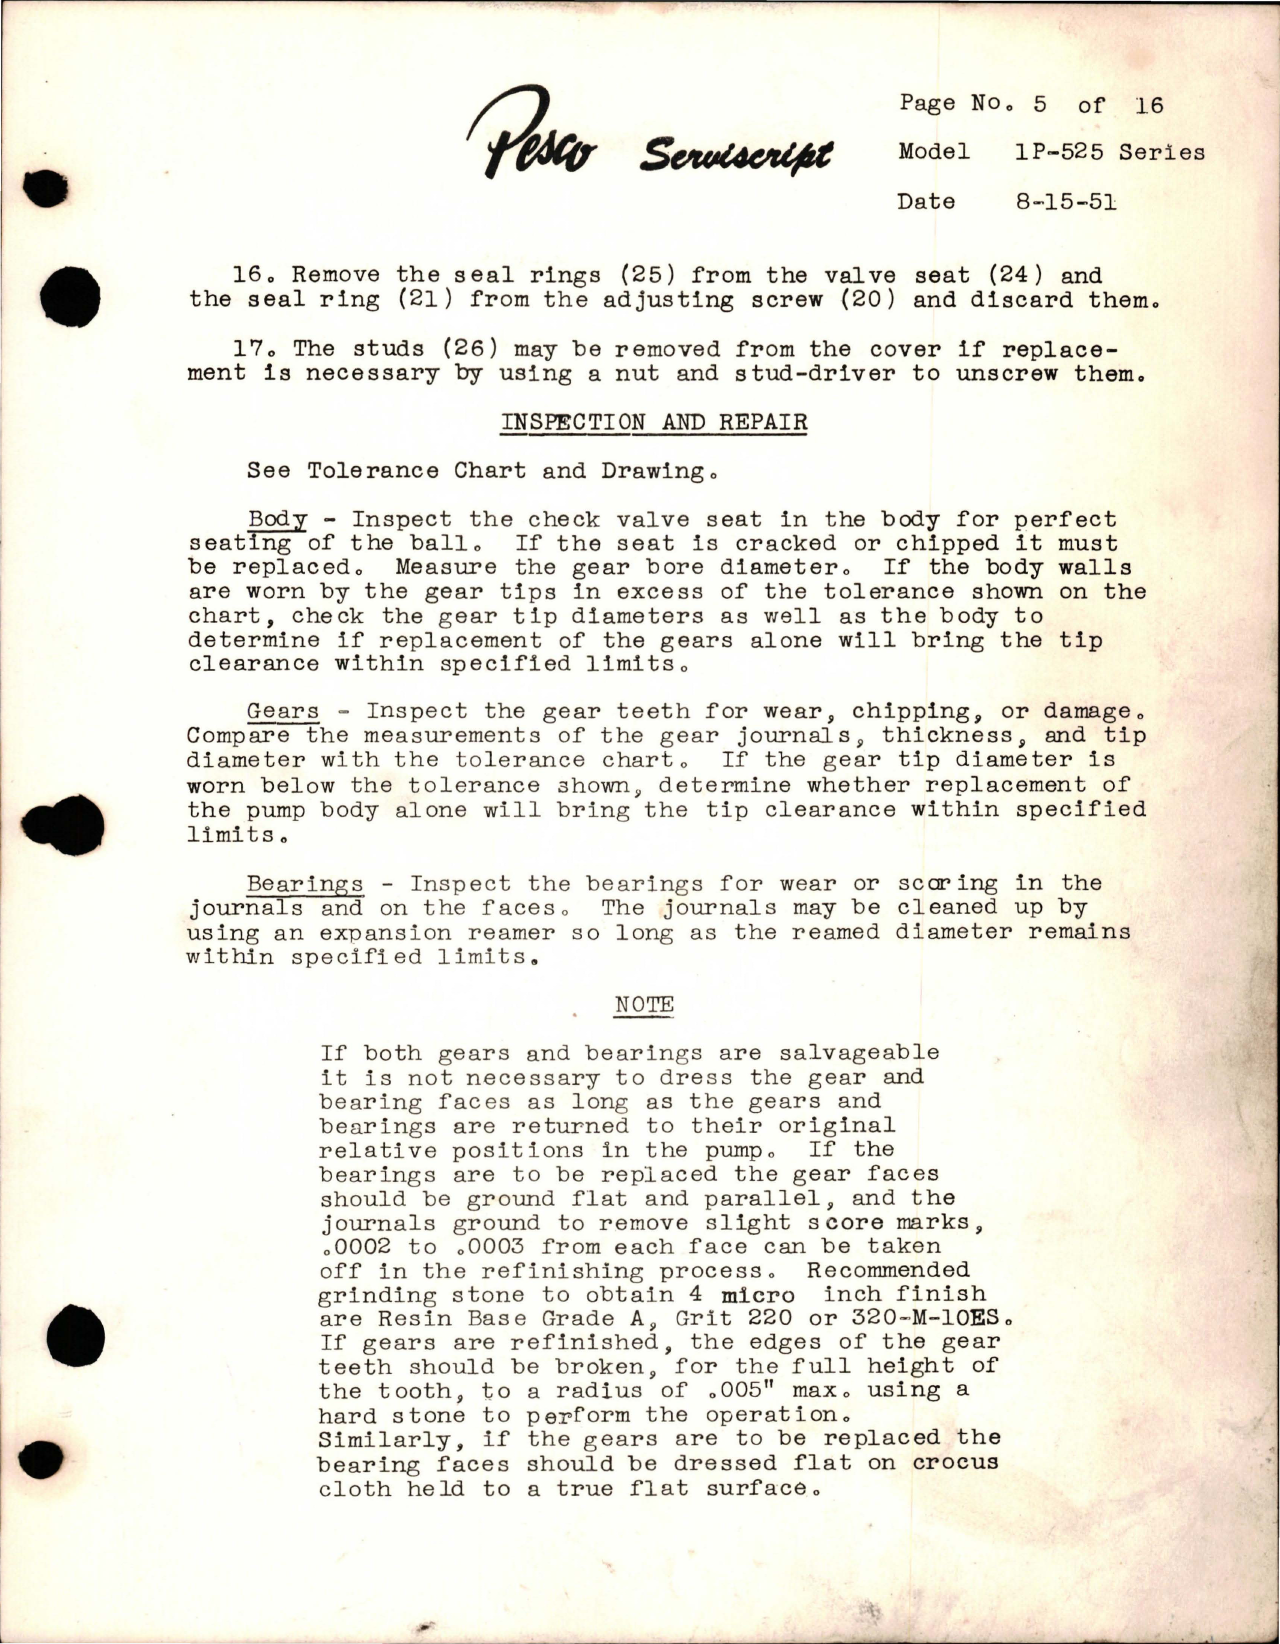 Sample page 5 from AirCorps Library document: Pesco Serviscript - Model 1P-525 Series Hydraulic Pumps